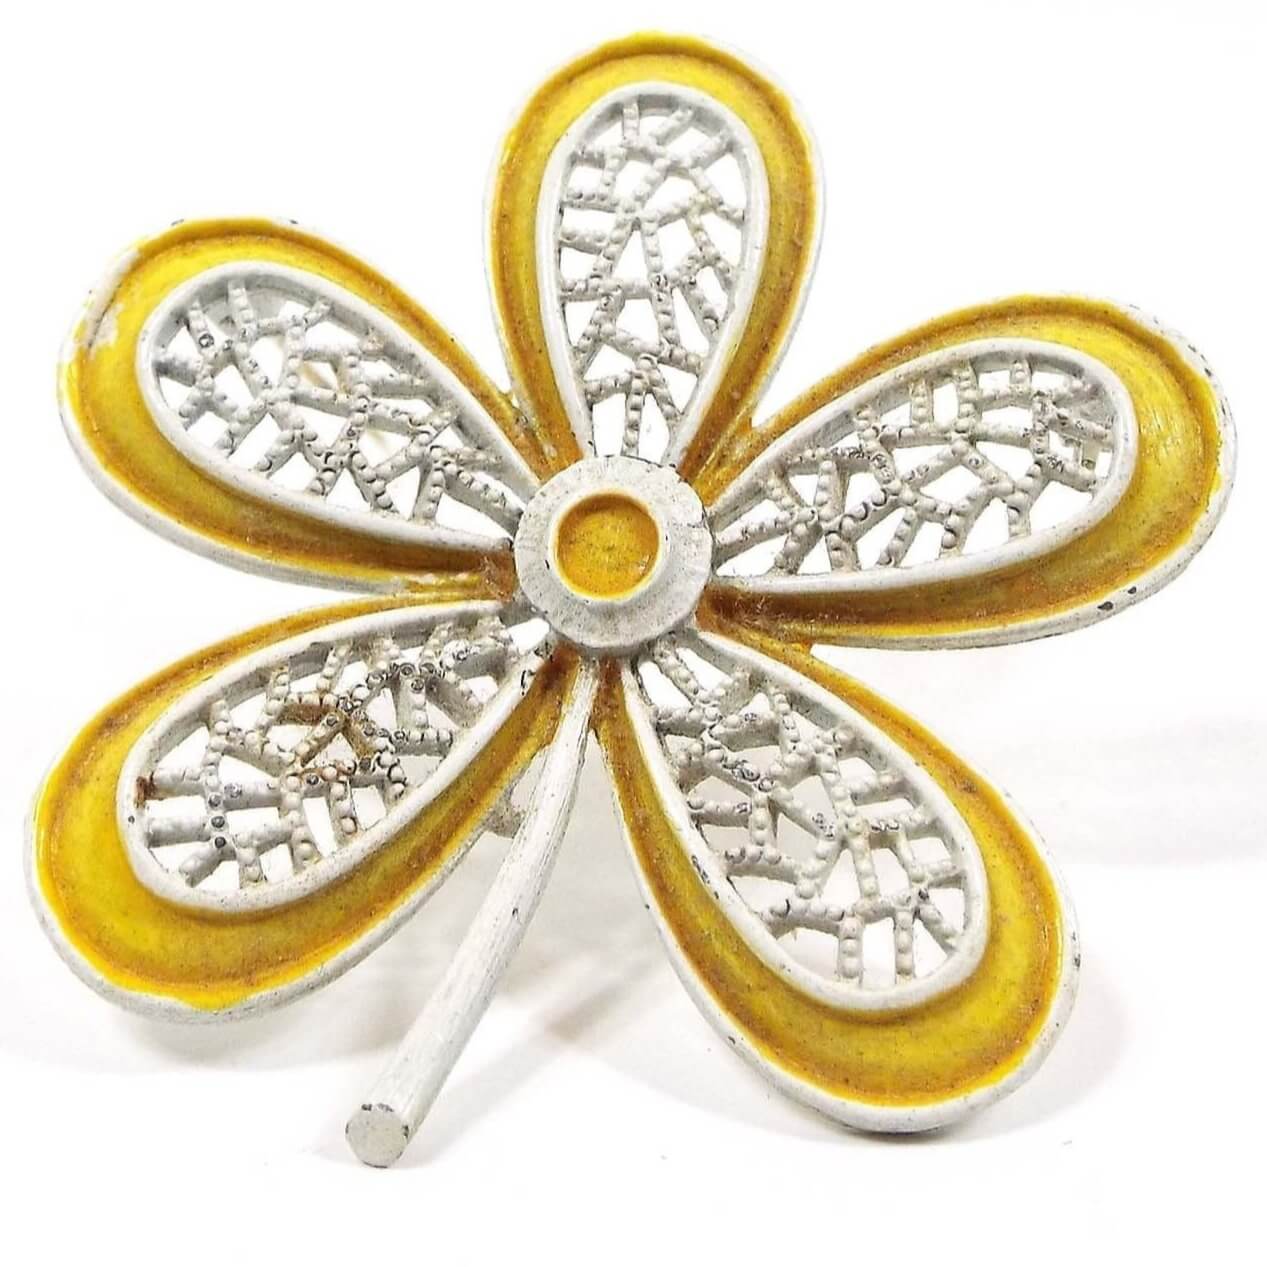 Front view of the 1960's Mid Century vintage Hippie flower brooch pin. It is shaped like a large flower with long rounded petals. The petals have a filigree design. It is white enameled with a yellow enamel edge and center. 